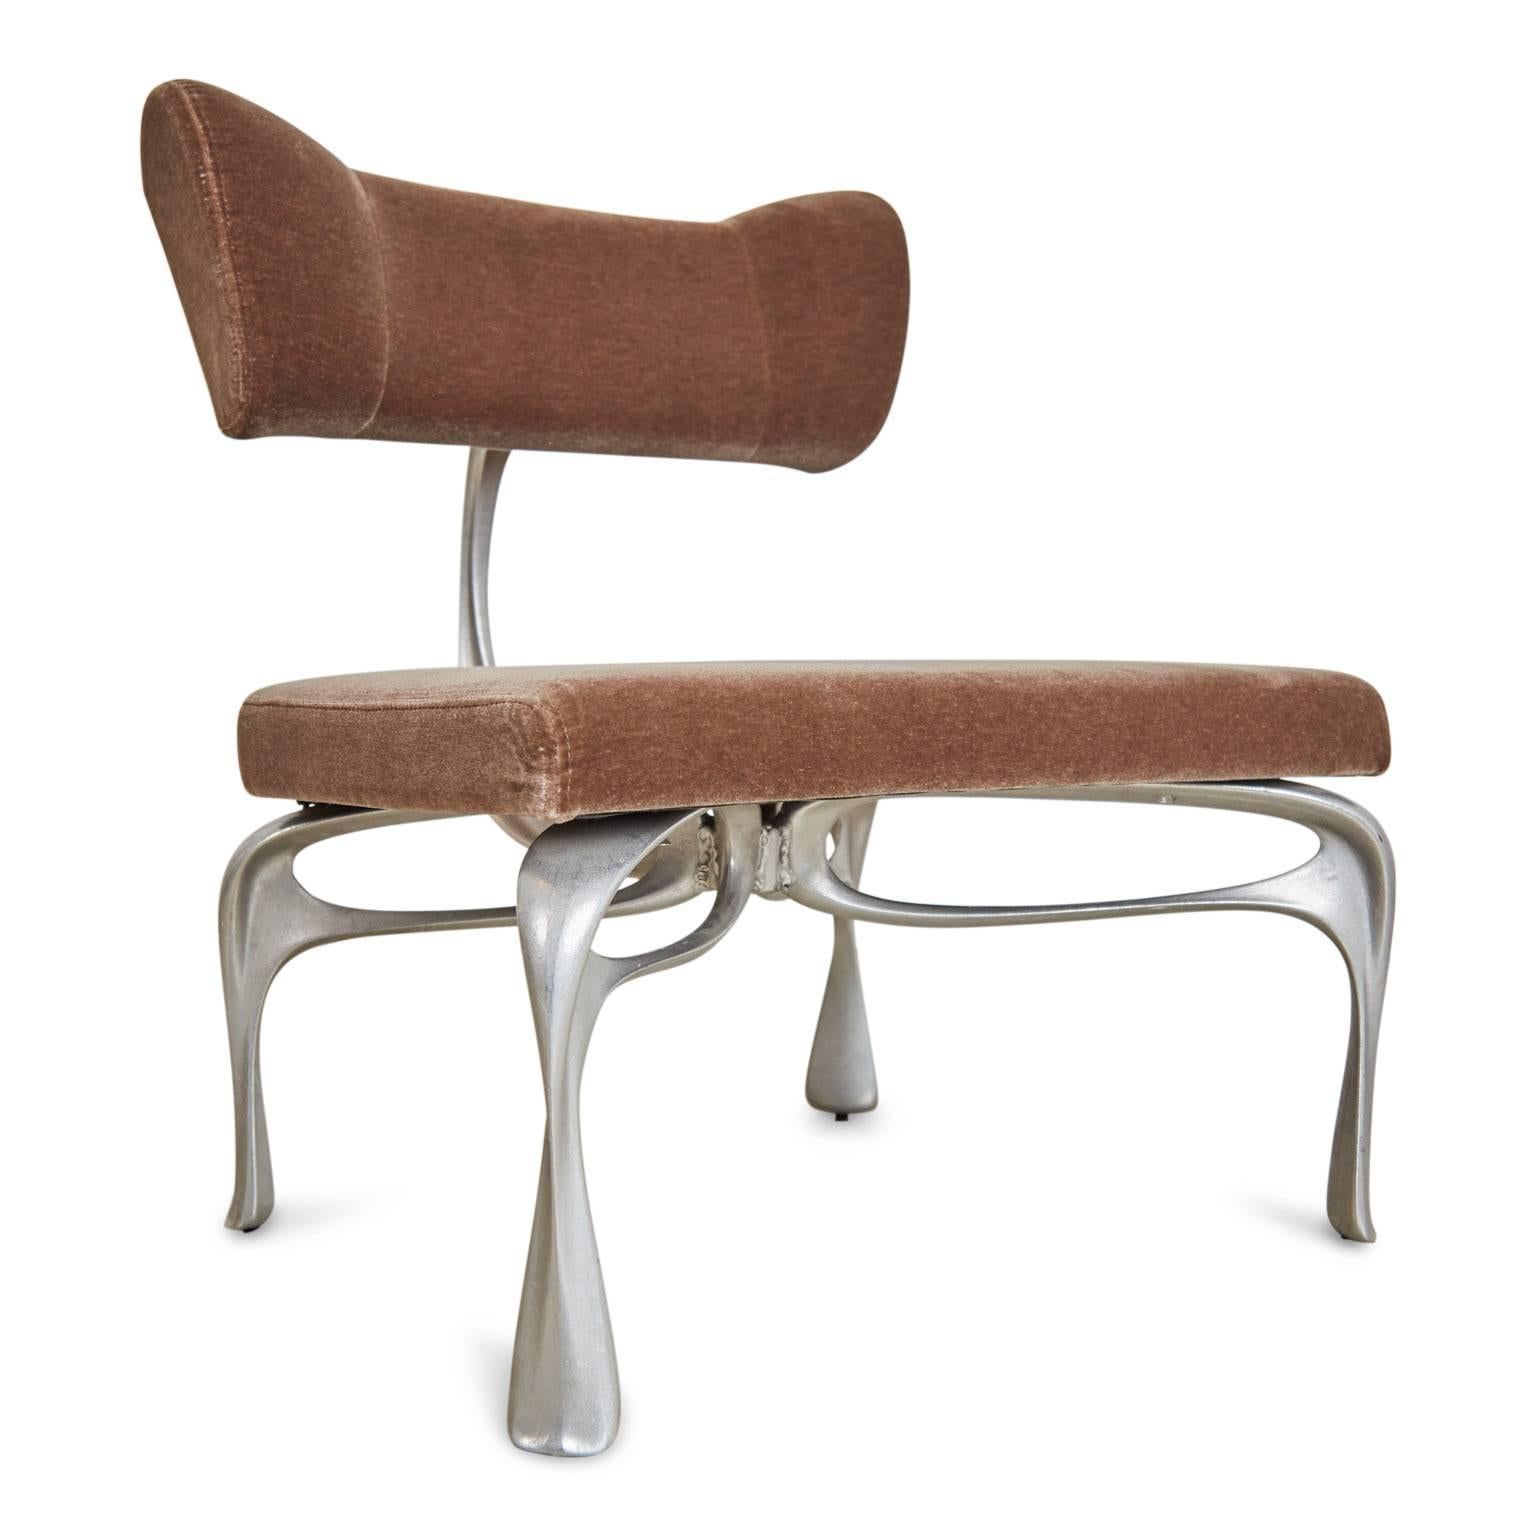 Modern Jordan Mozer Prototype Victory Lounge Chair from Artists Collection